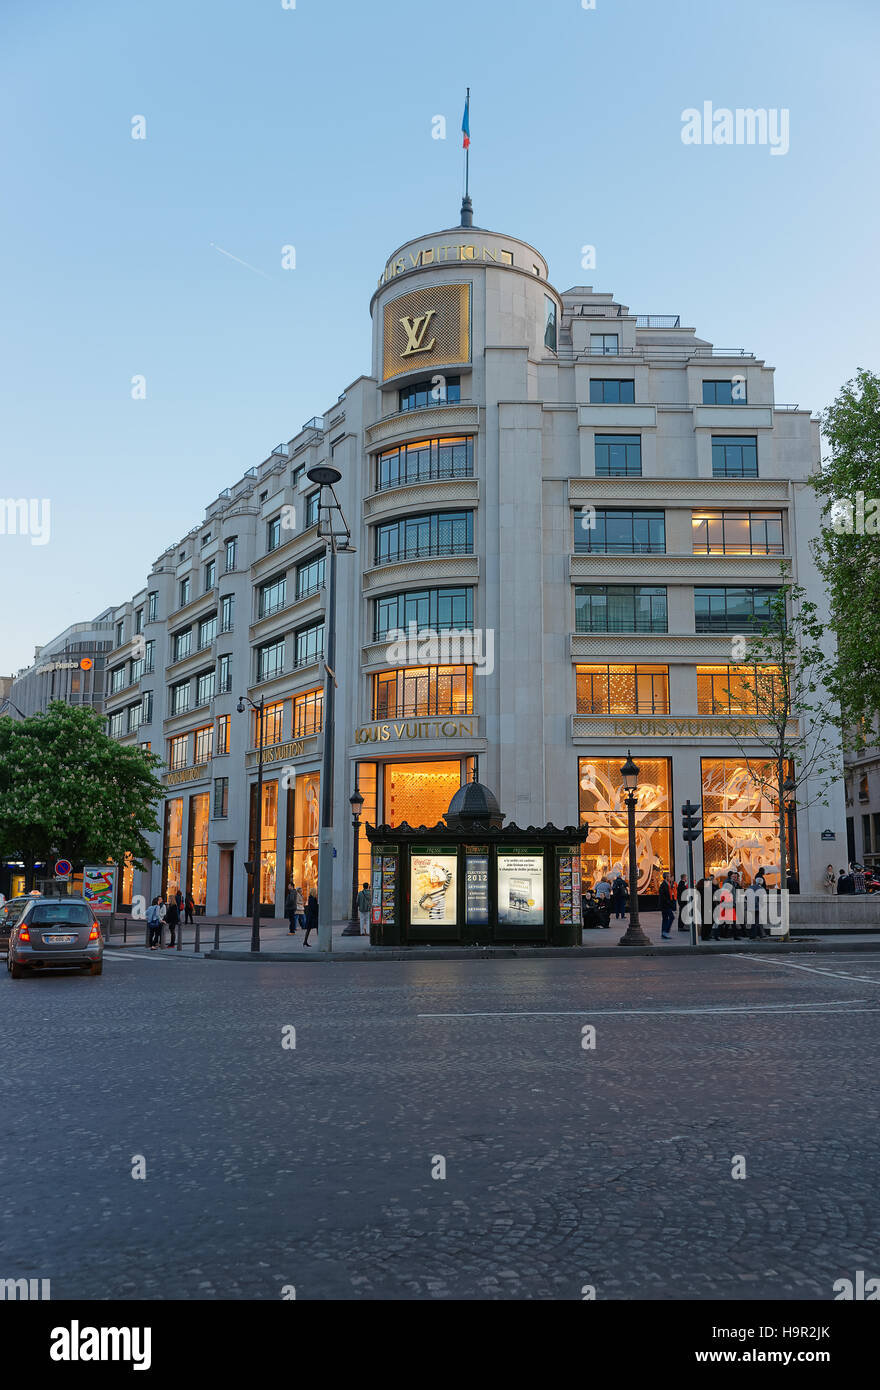 Louis Vuitton Outlet On Champs Elysees In Paris - France Stock